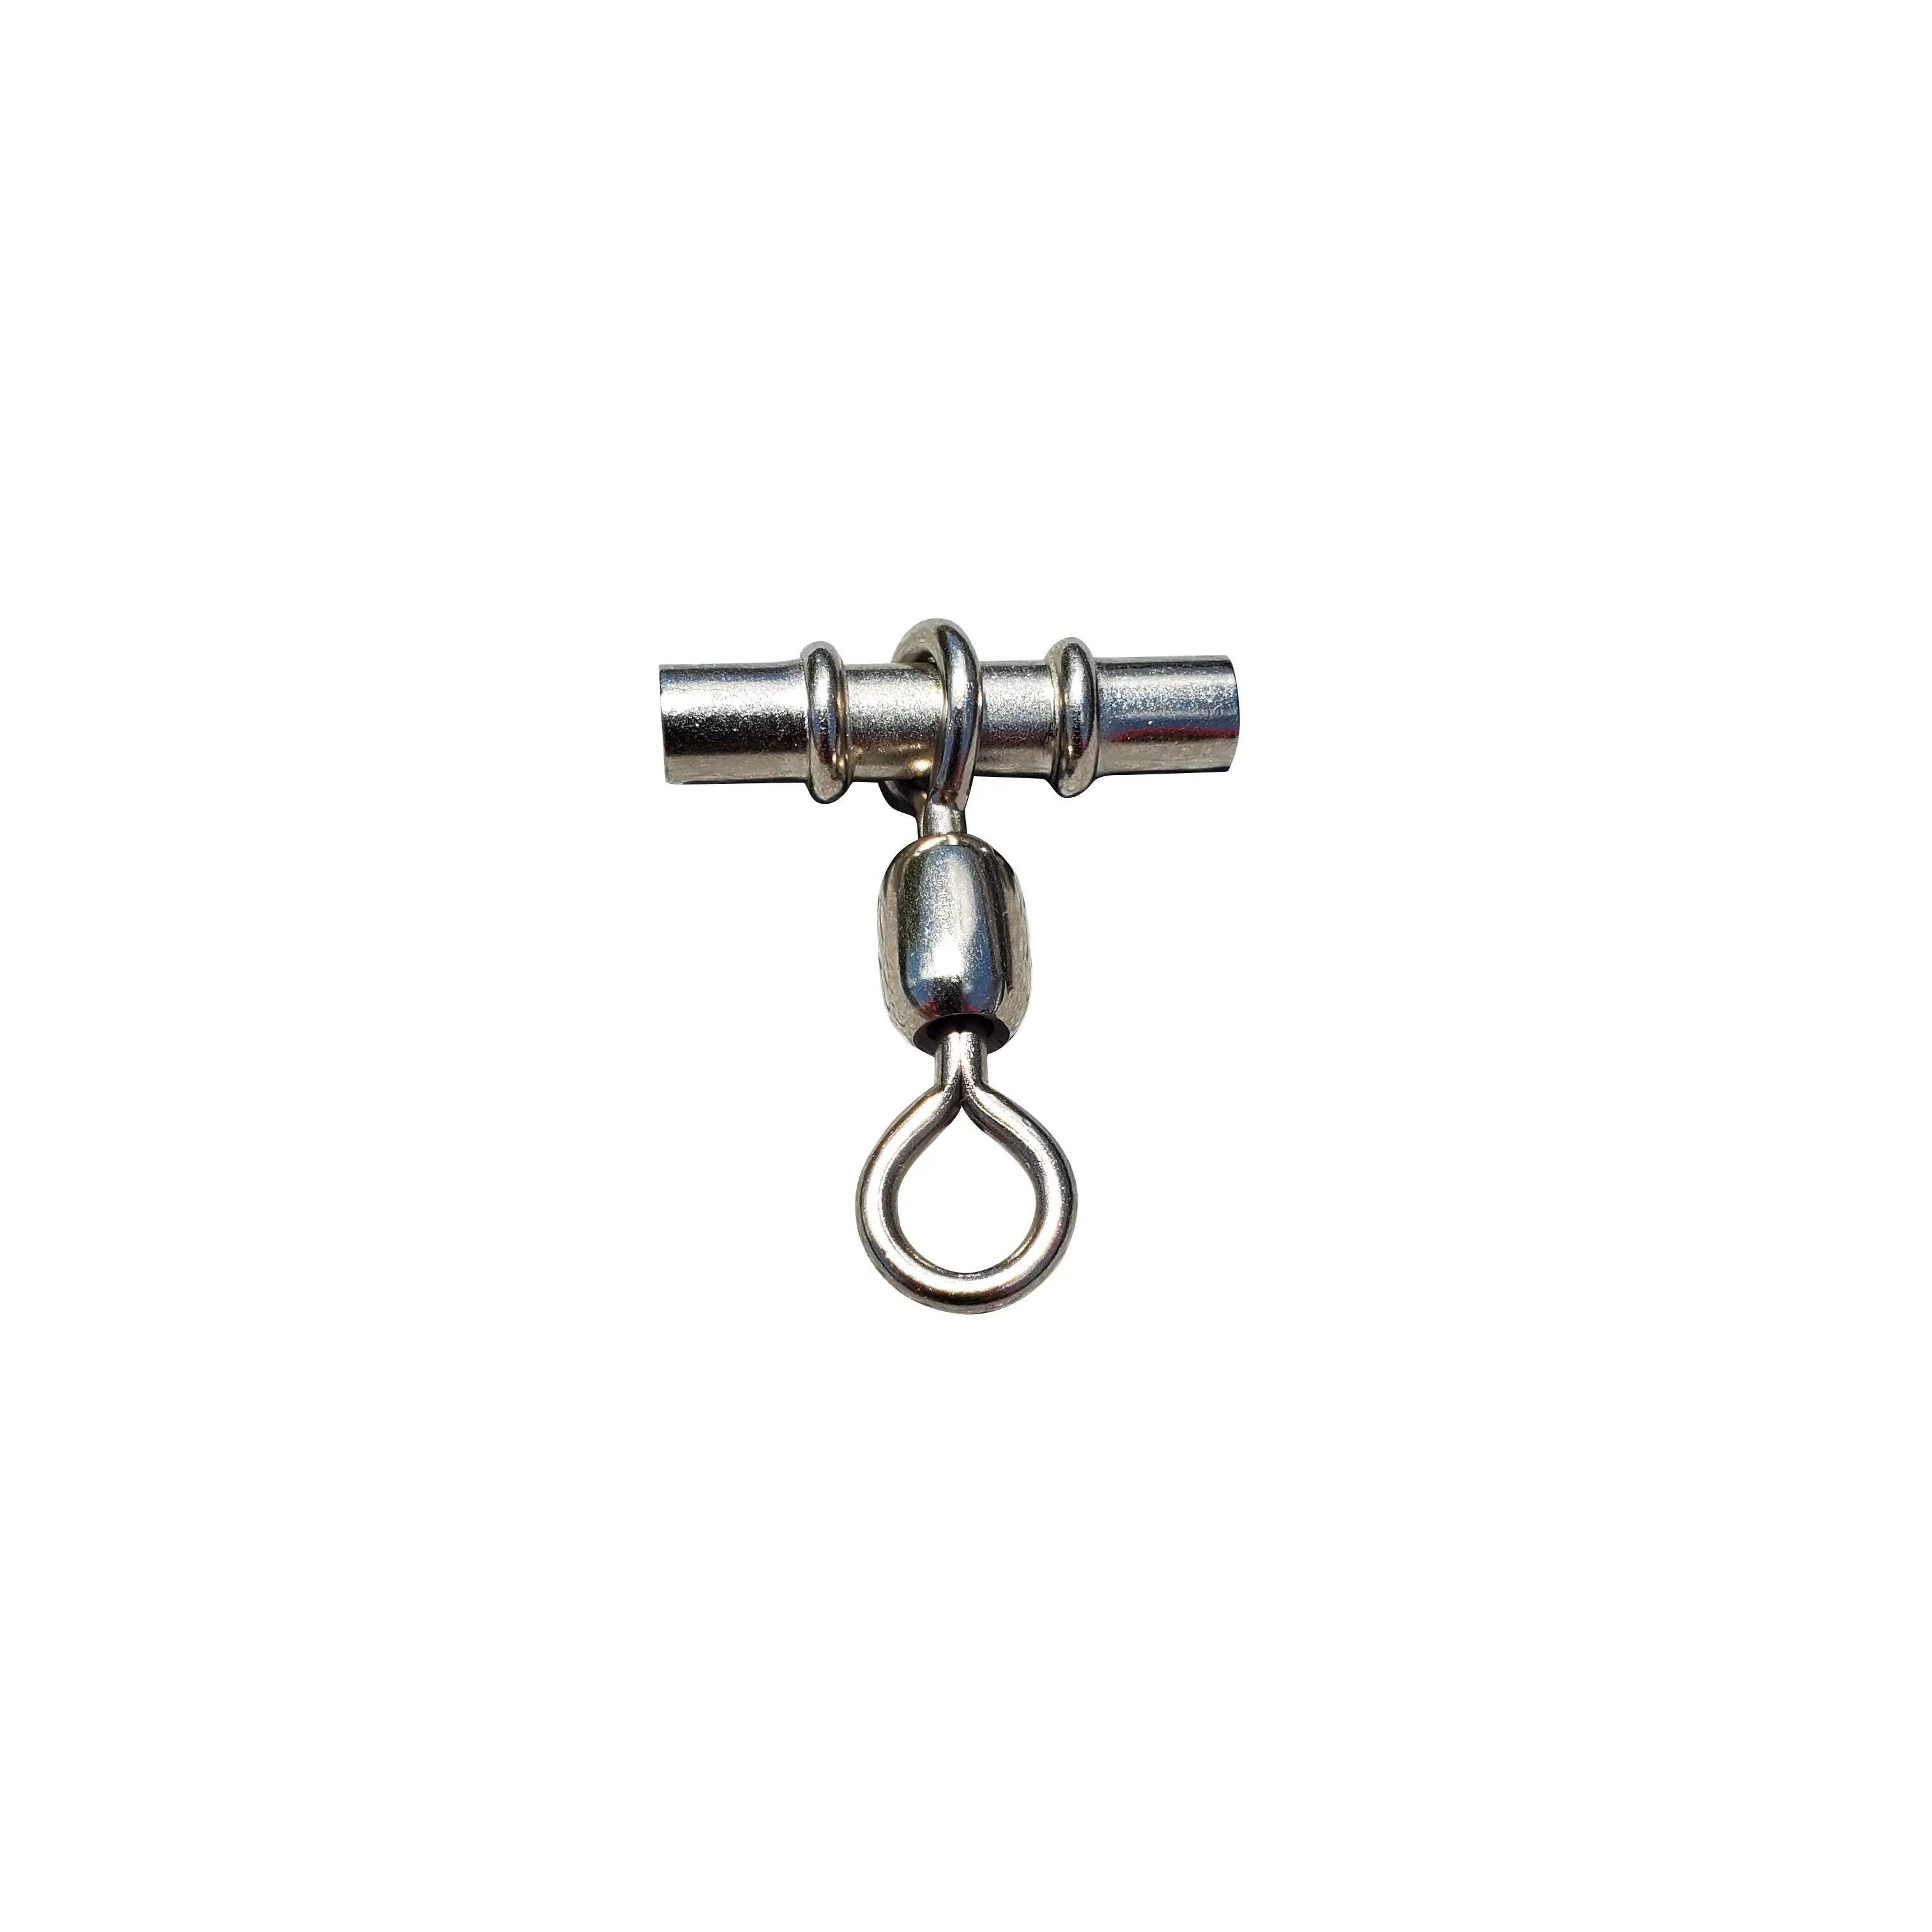 Owner Ball Bearing Snap Swivels – Get Wet Outdoors